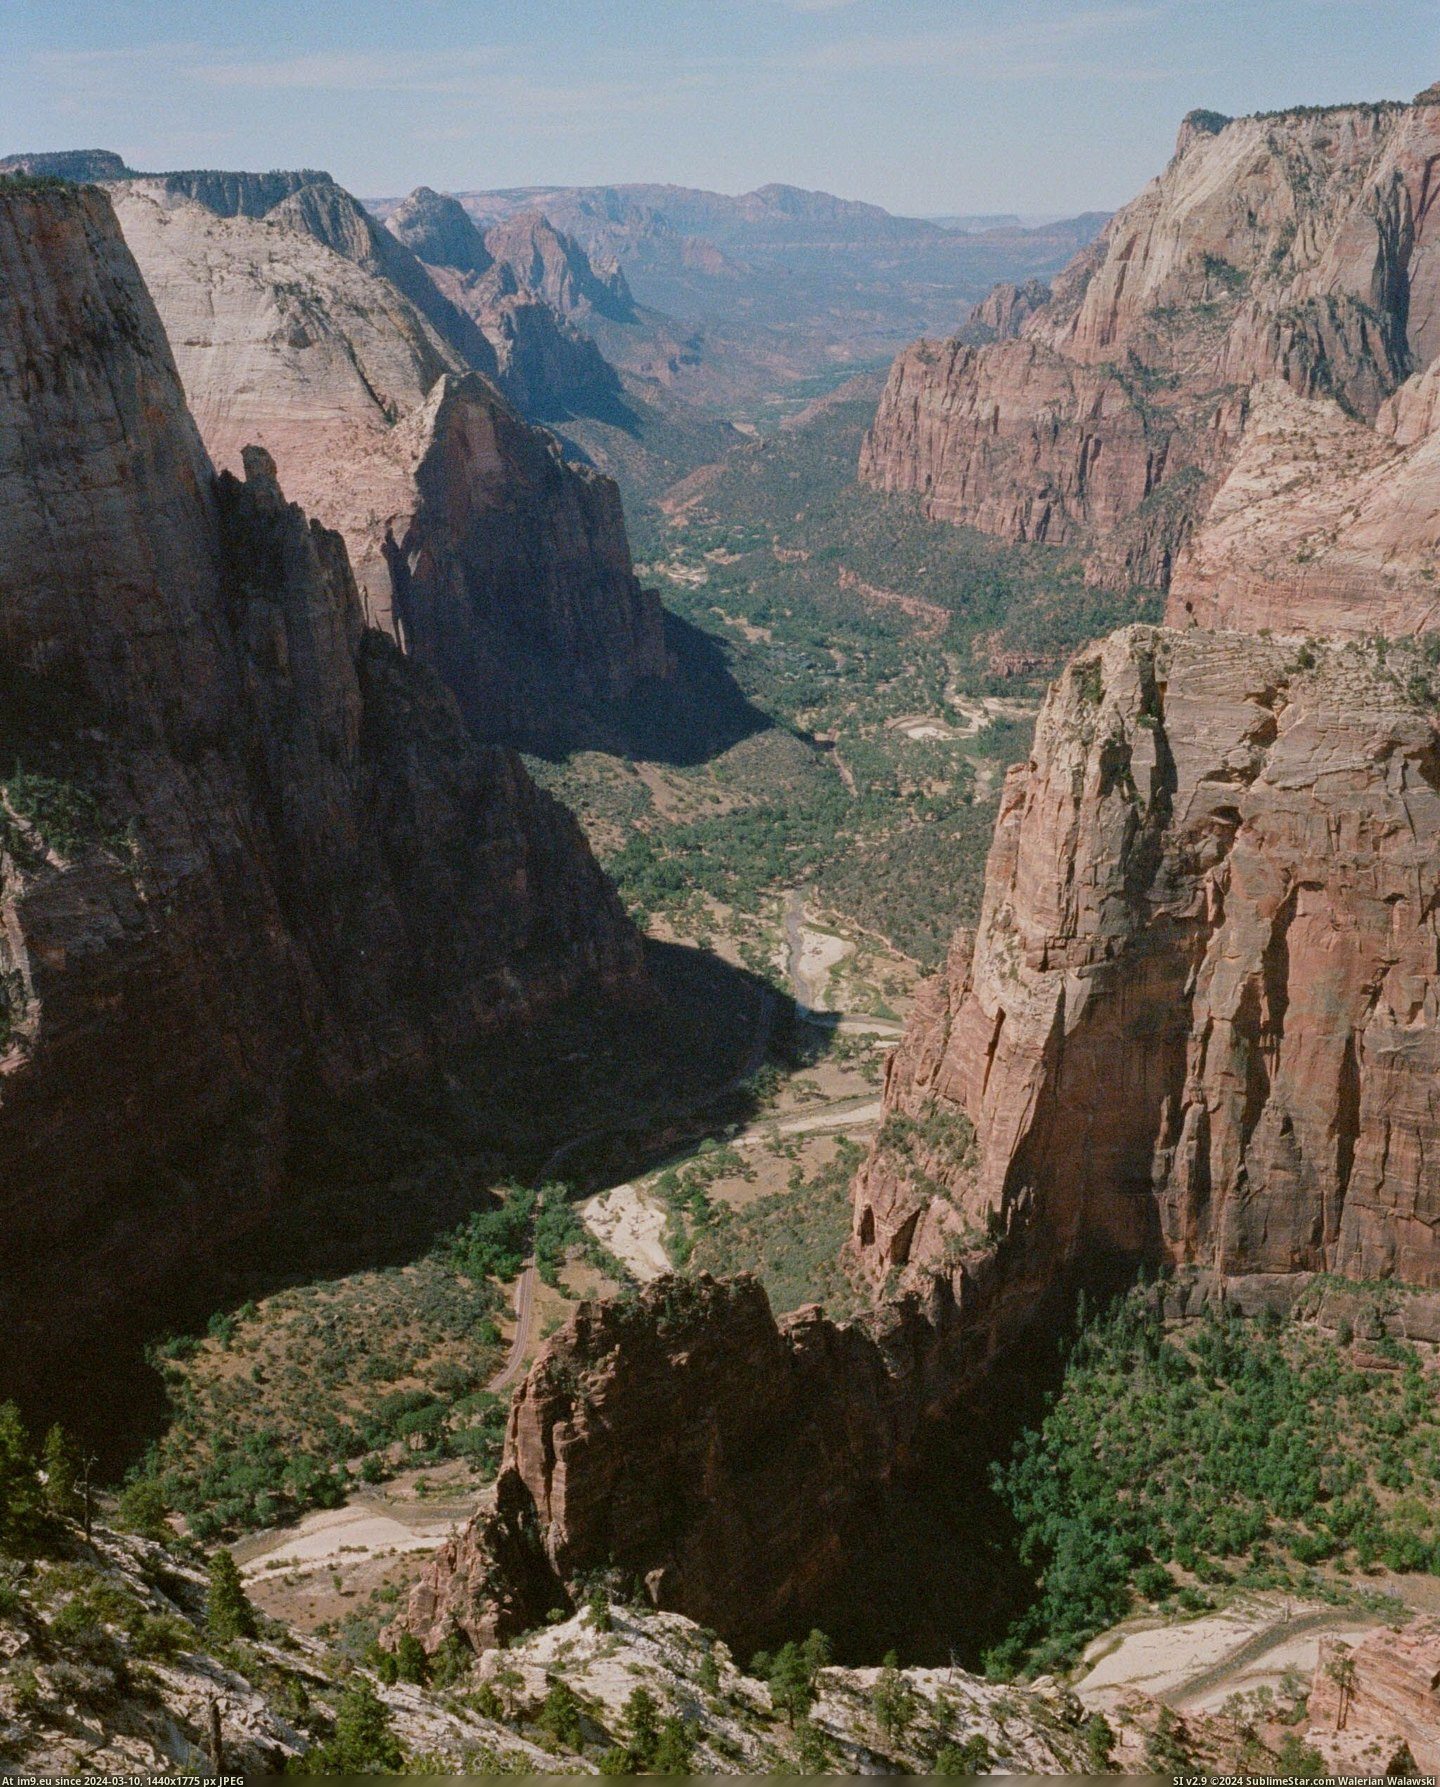 #Park #National #Point #Zion #Opinion #Overlooking #Observation #Utah #Angels #Landing [Earthporn] The best view in Zion in my opinion. From Observation Point, overlooking Angels Landing. Zion National Park, Utah. [ Pic. (Bild von album My r/EARTHPORN favs))